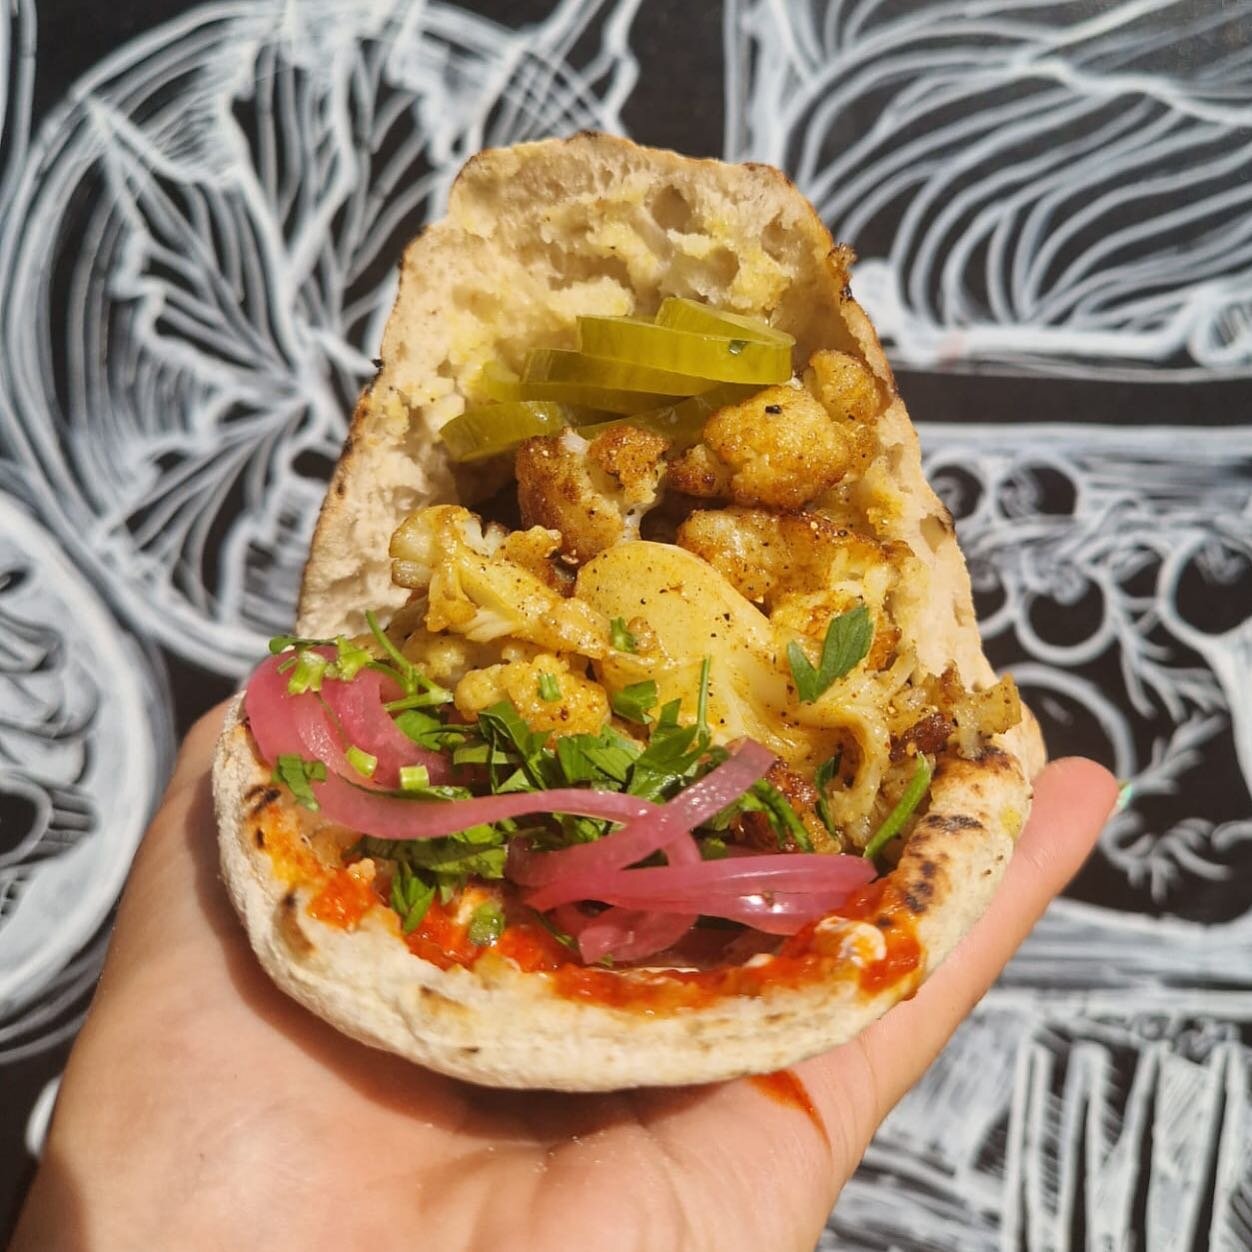 Cauliflower obsessed! 💛
Stuffed pitas are our jam. 🥙 Tuesday-Saturday 11-19u 

Stay tuned for some exciting news coming soon! We&rsquo;ve got some new ideas and extra hours in the works! 🙌🏽